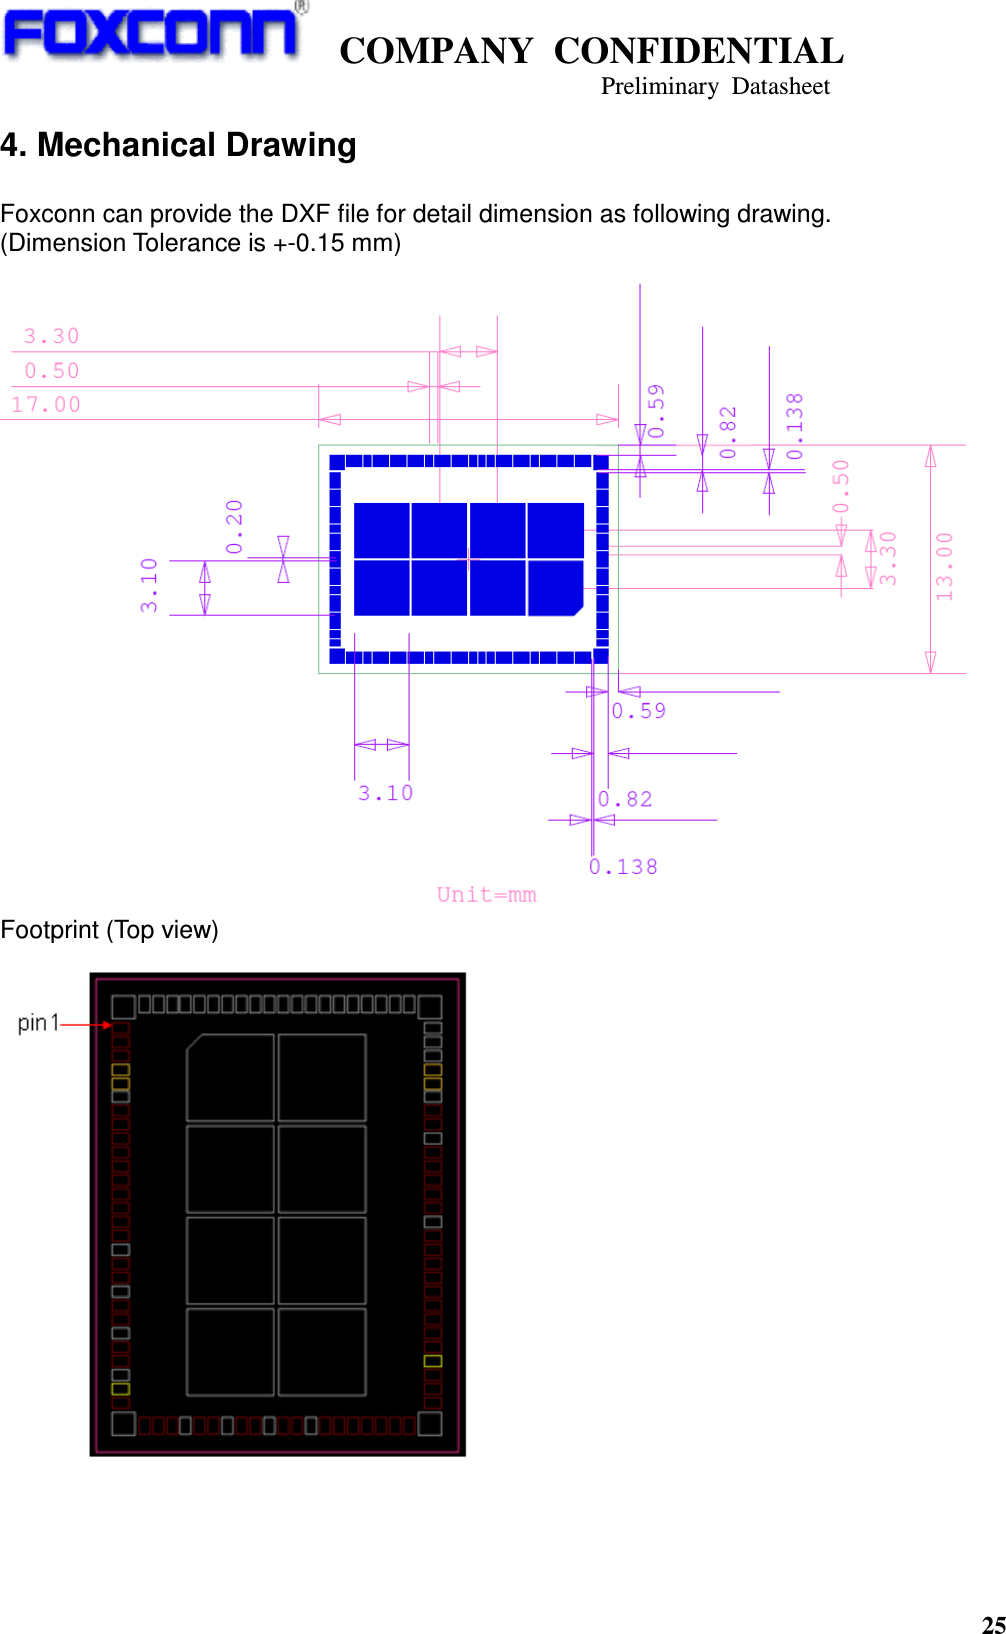    COMPANY  CONFIDENTIAL                                                                     Preliminary  Datasheet 25  4. Mechanical Drawing  Foxconn can provide the DXF file for detail dimension as following drawing.   (Dimension Tolerance is +-0.15 mm)  Footprint (Top view)     